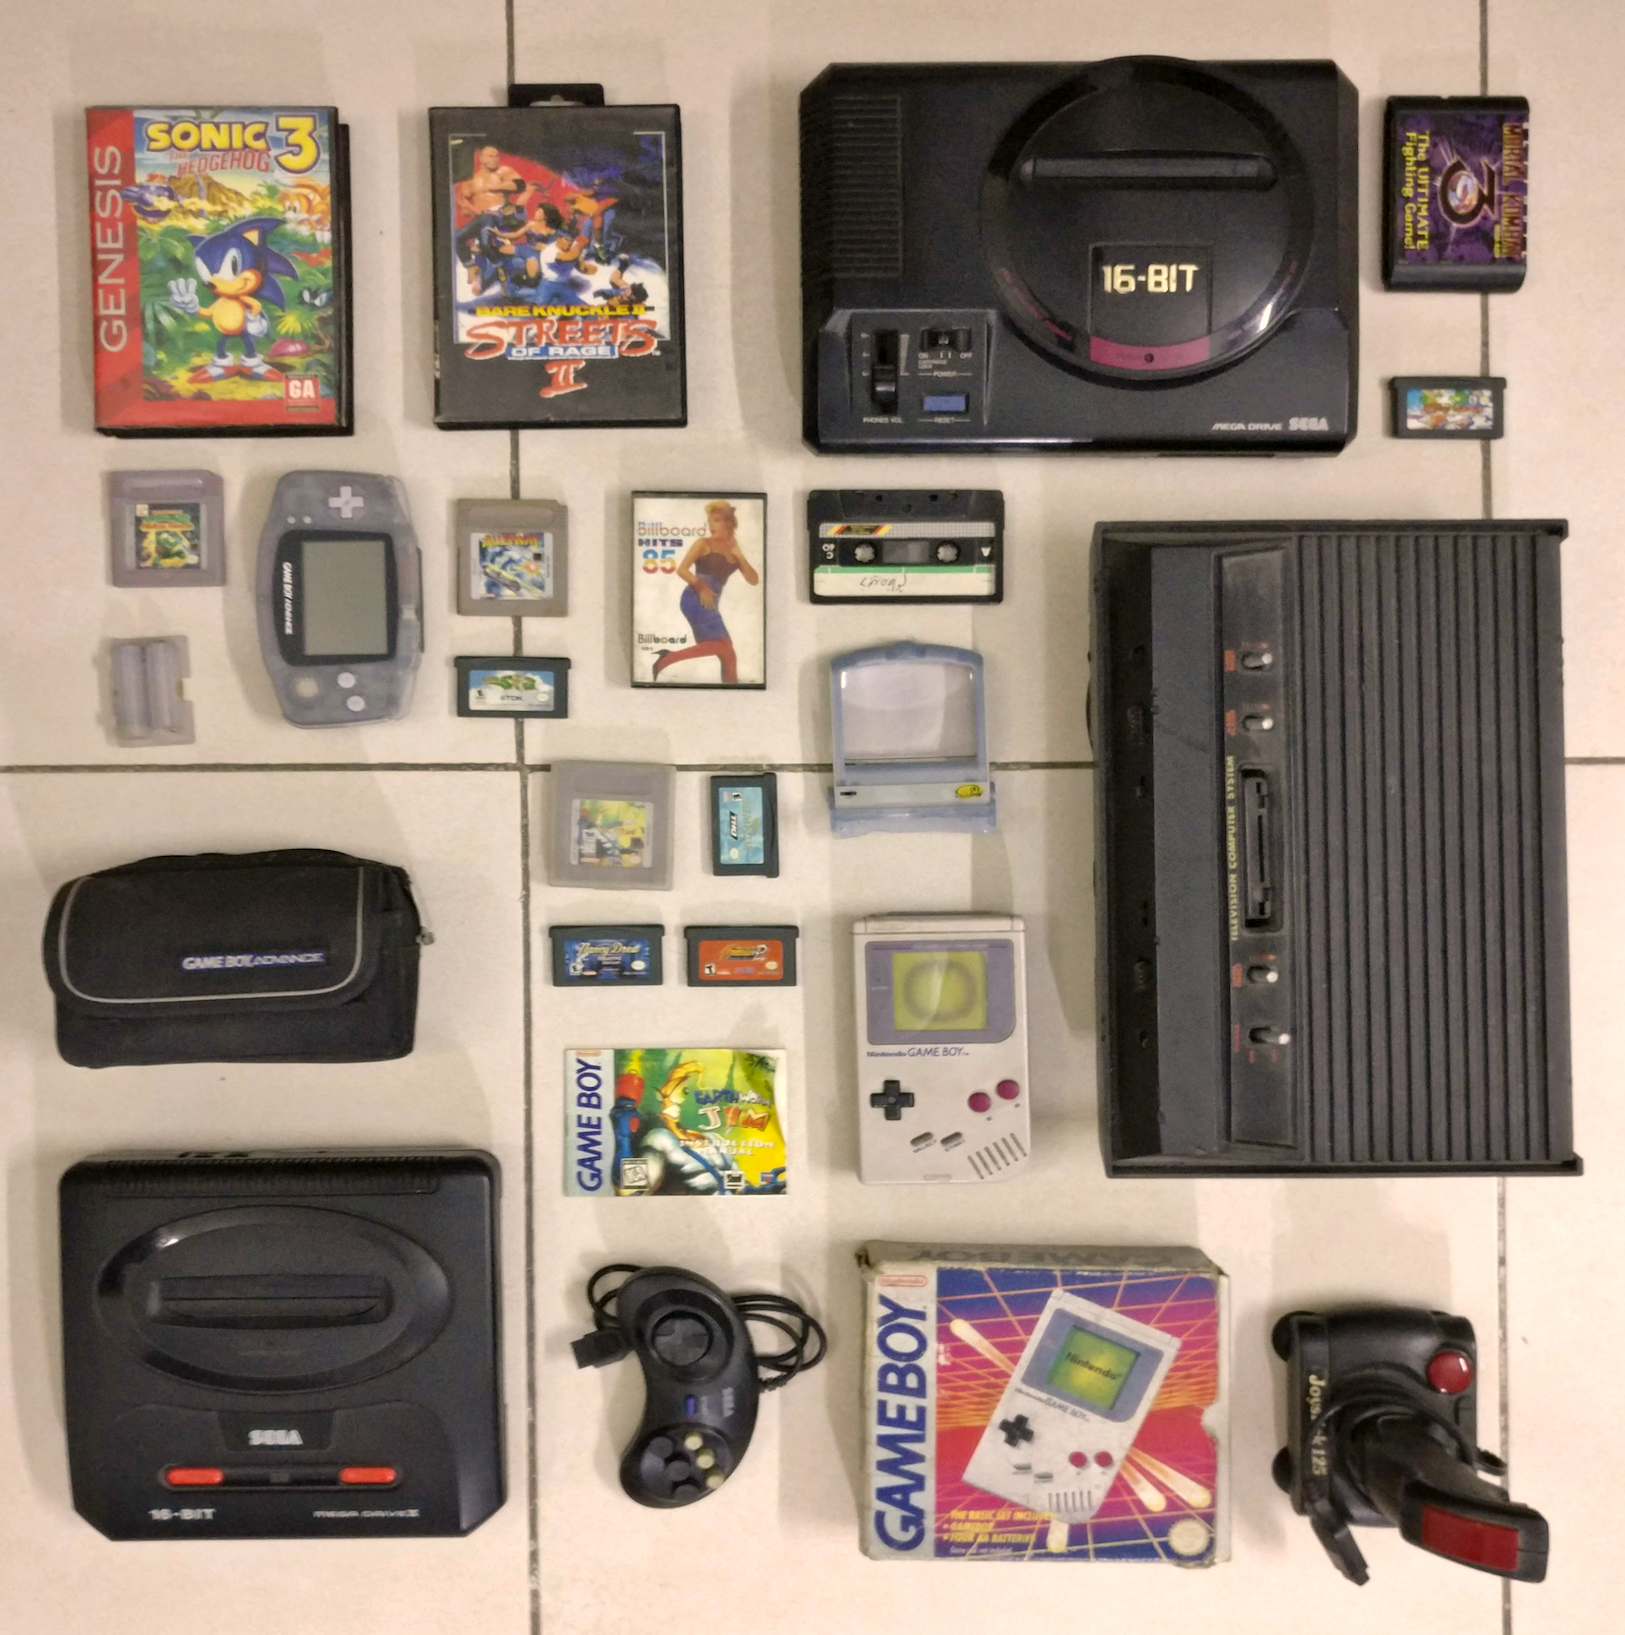 Many of my game consoles were eventually donated to my friend Talha for his growing collection. He kindly shared it with me for my thesis neatly knolled.